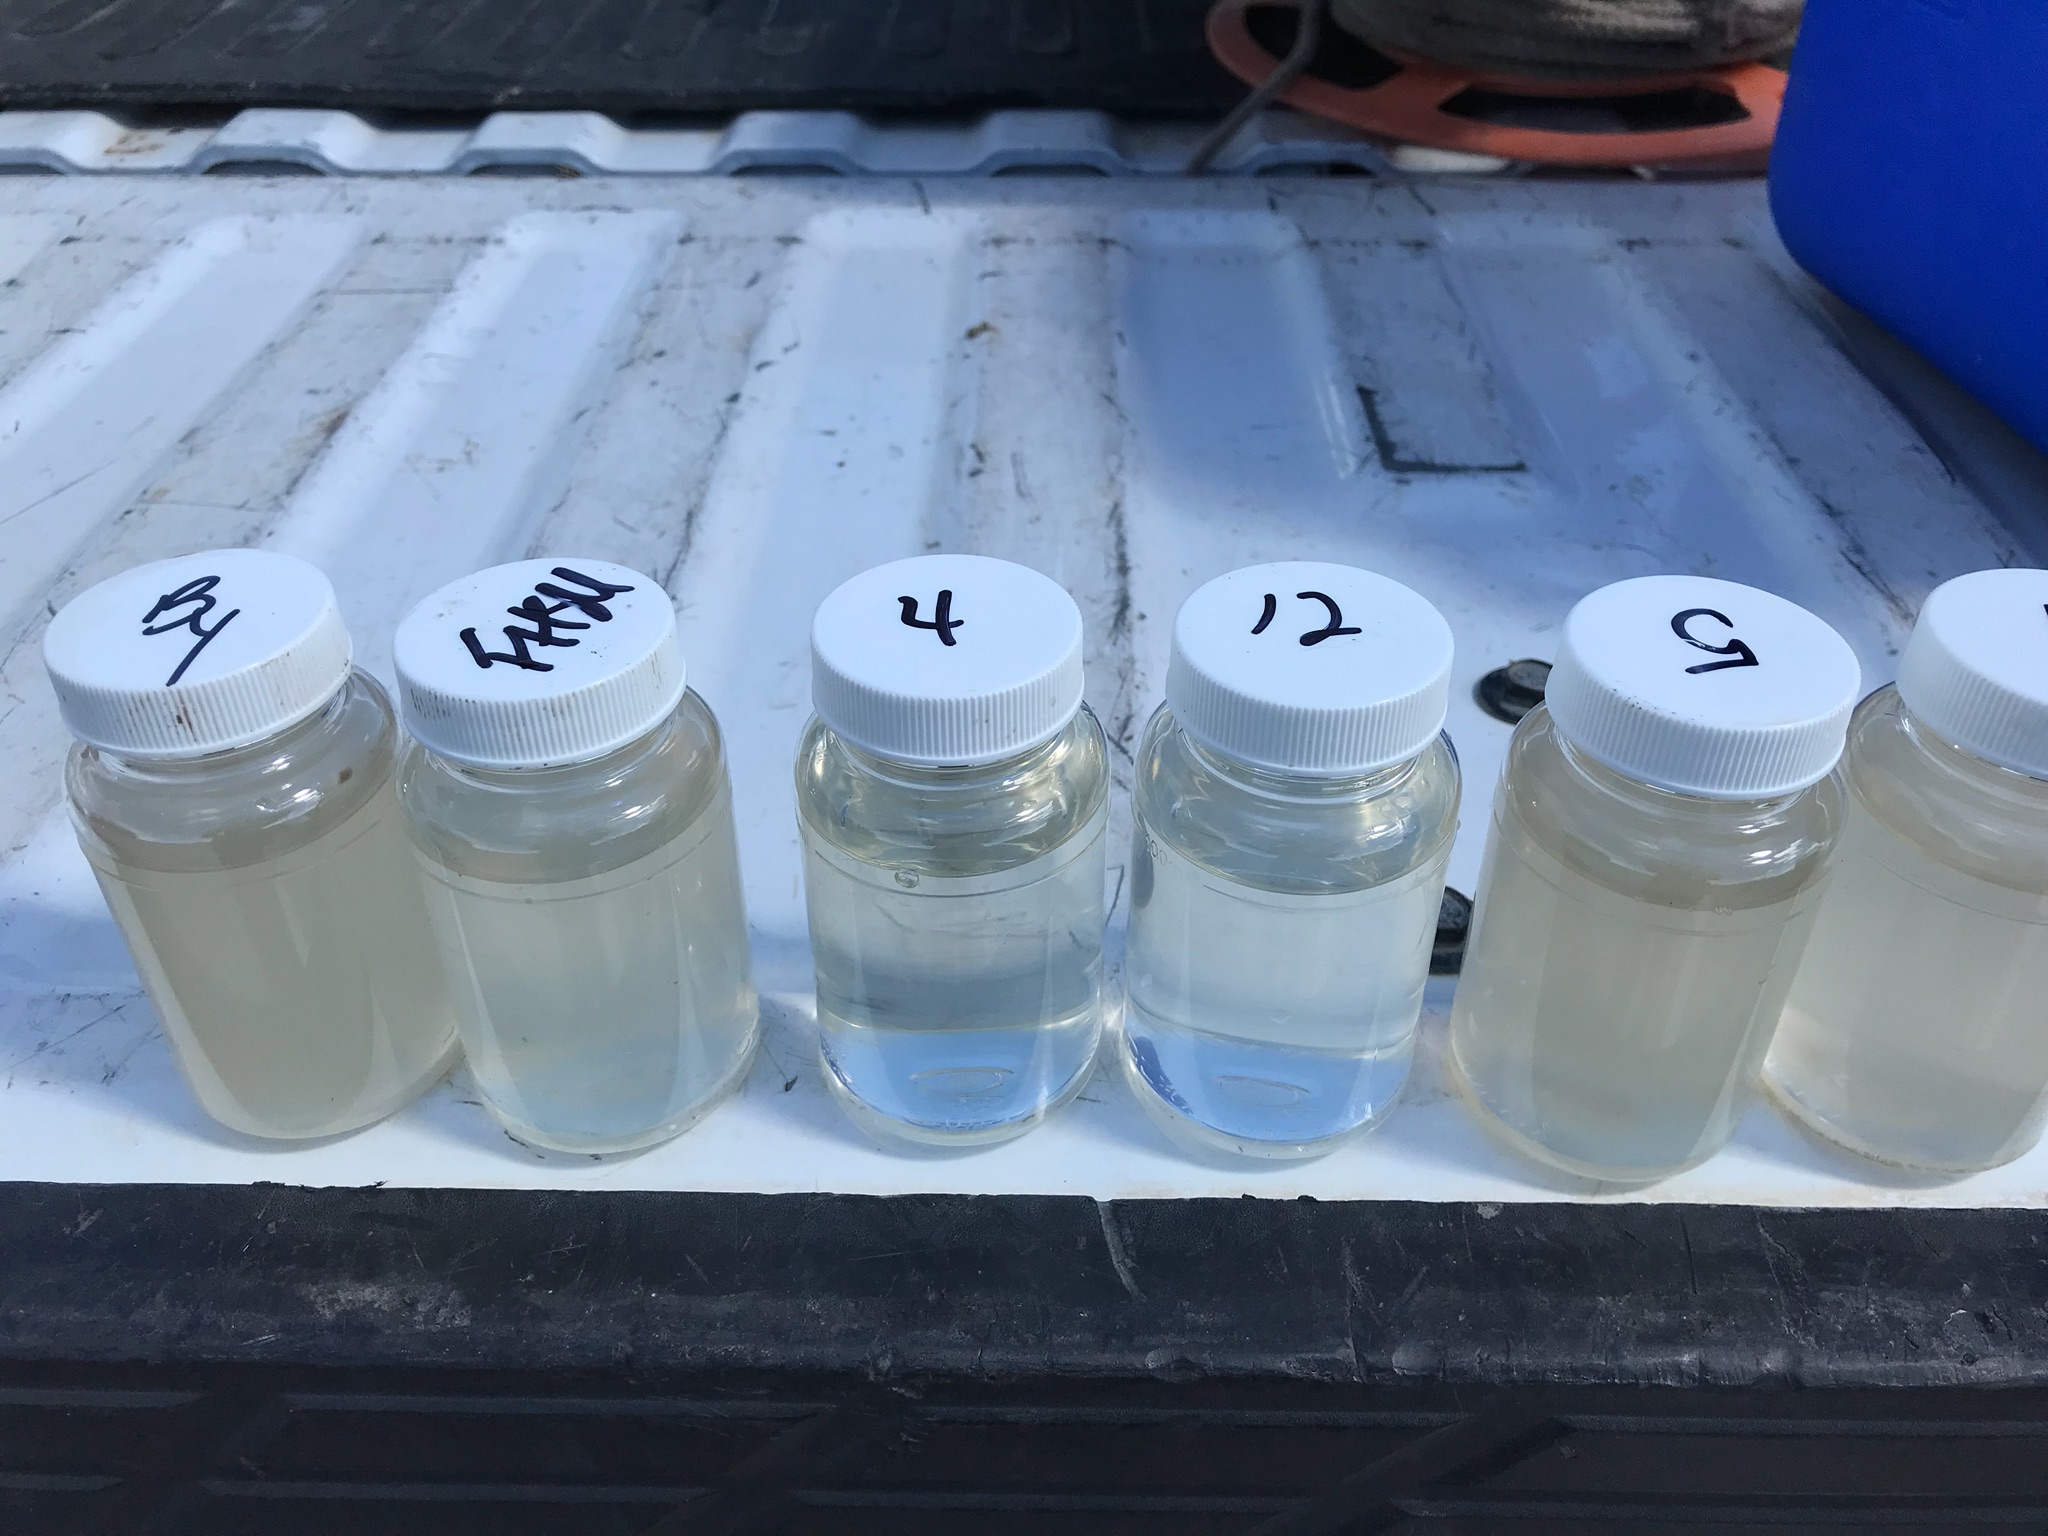 water samples lined up